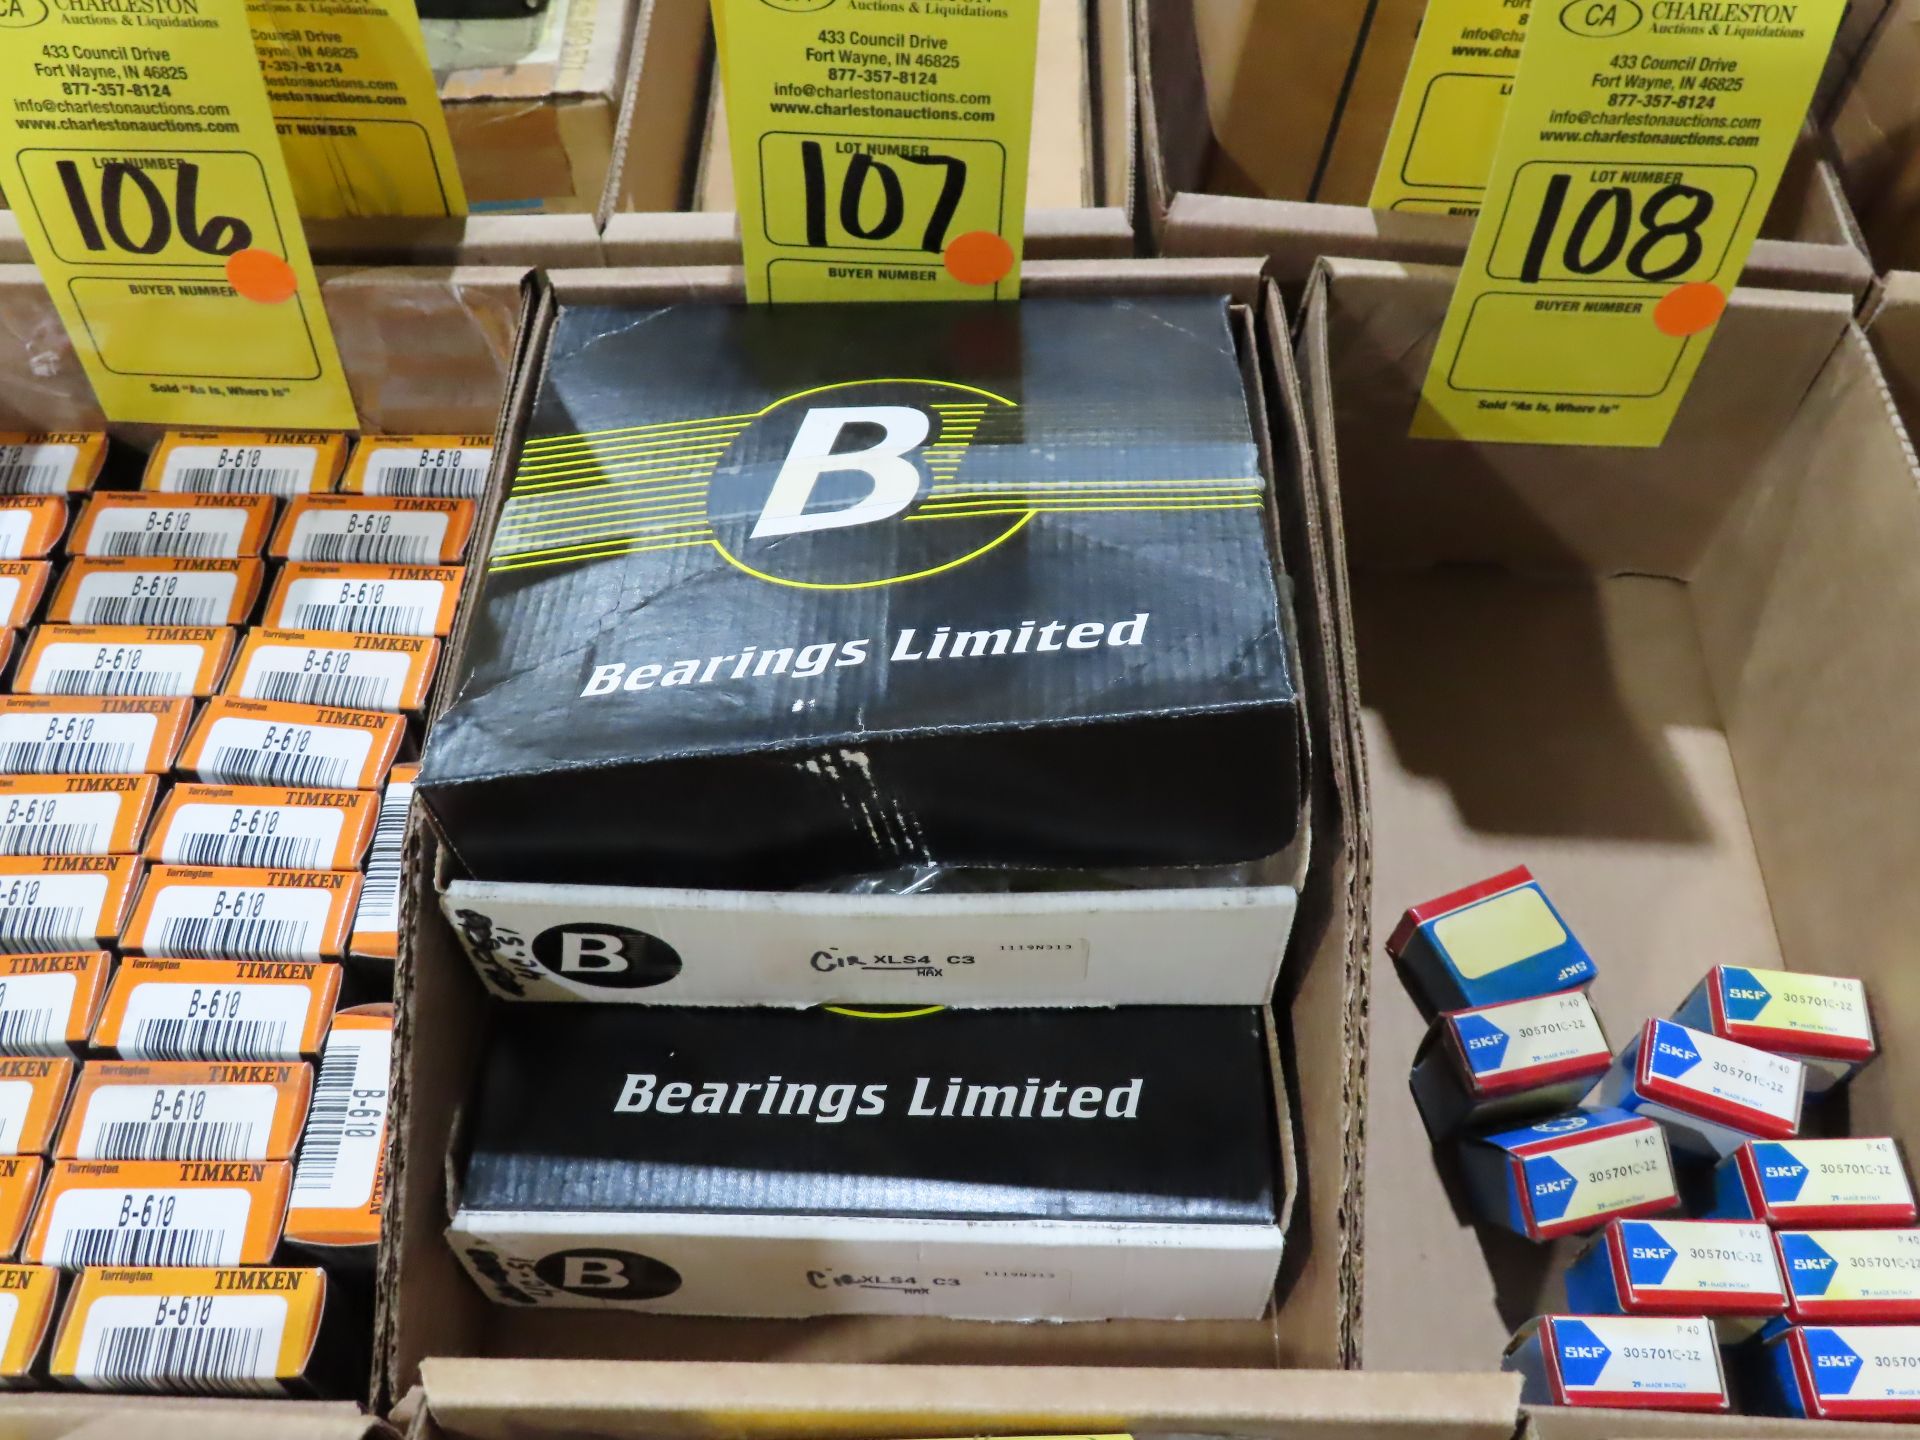 Qty 2 Bearings Limited model XLS4-C2, new in box, as always with Brolyn LLC auctions, all lots can